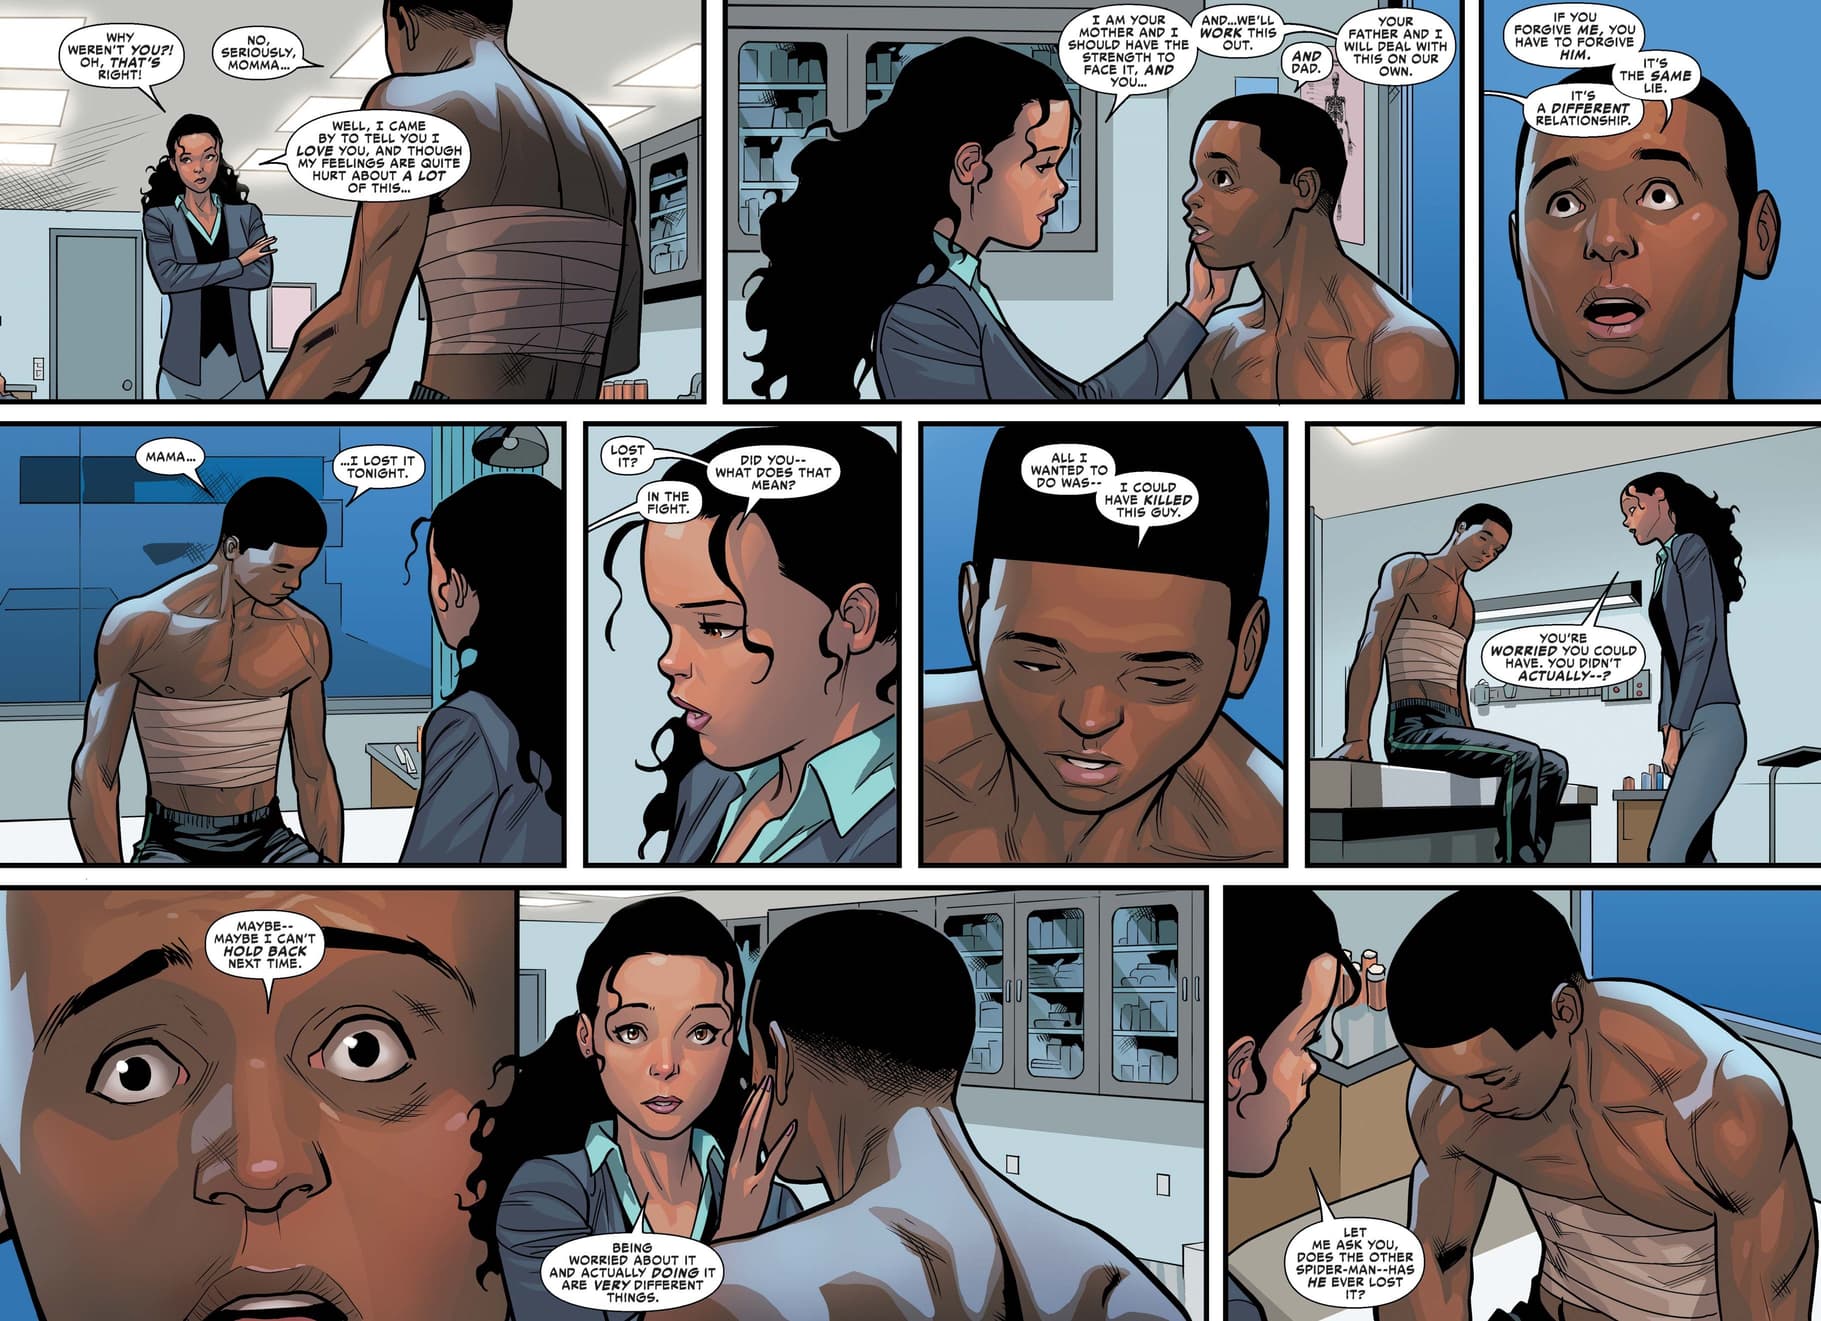 Miles Morales tells Rio his deepest fear in SPIDER-MAN (2016) #18.